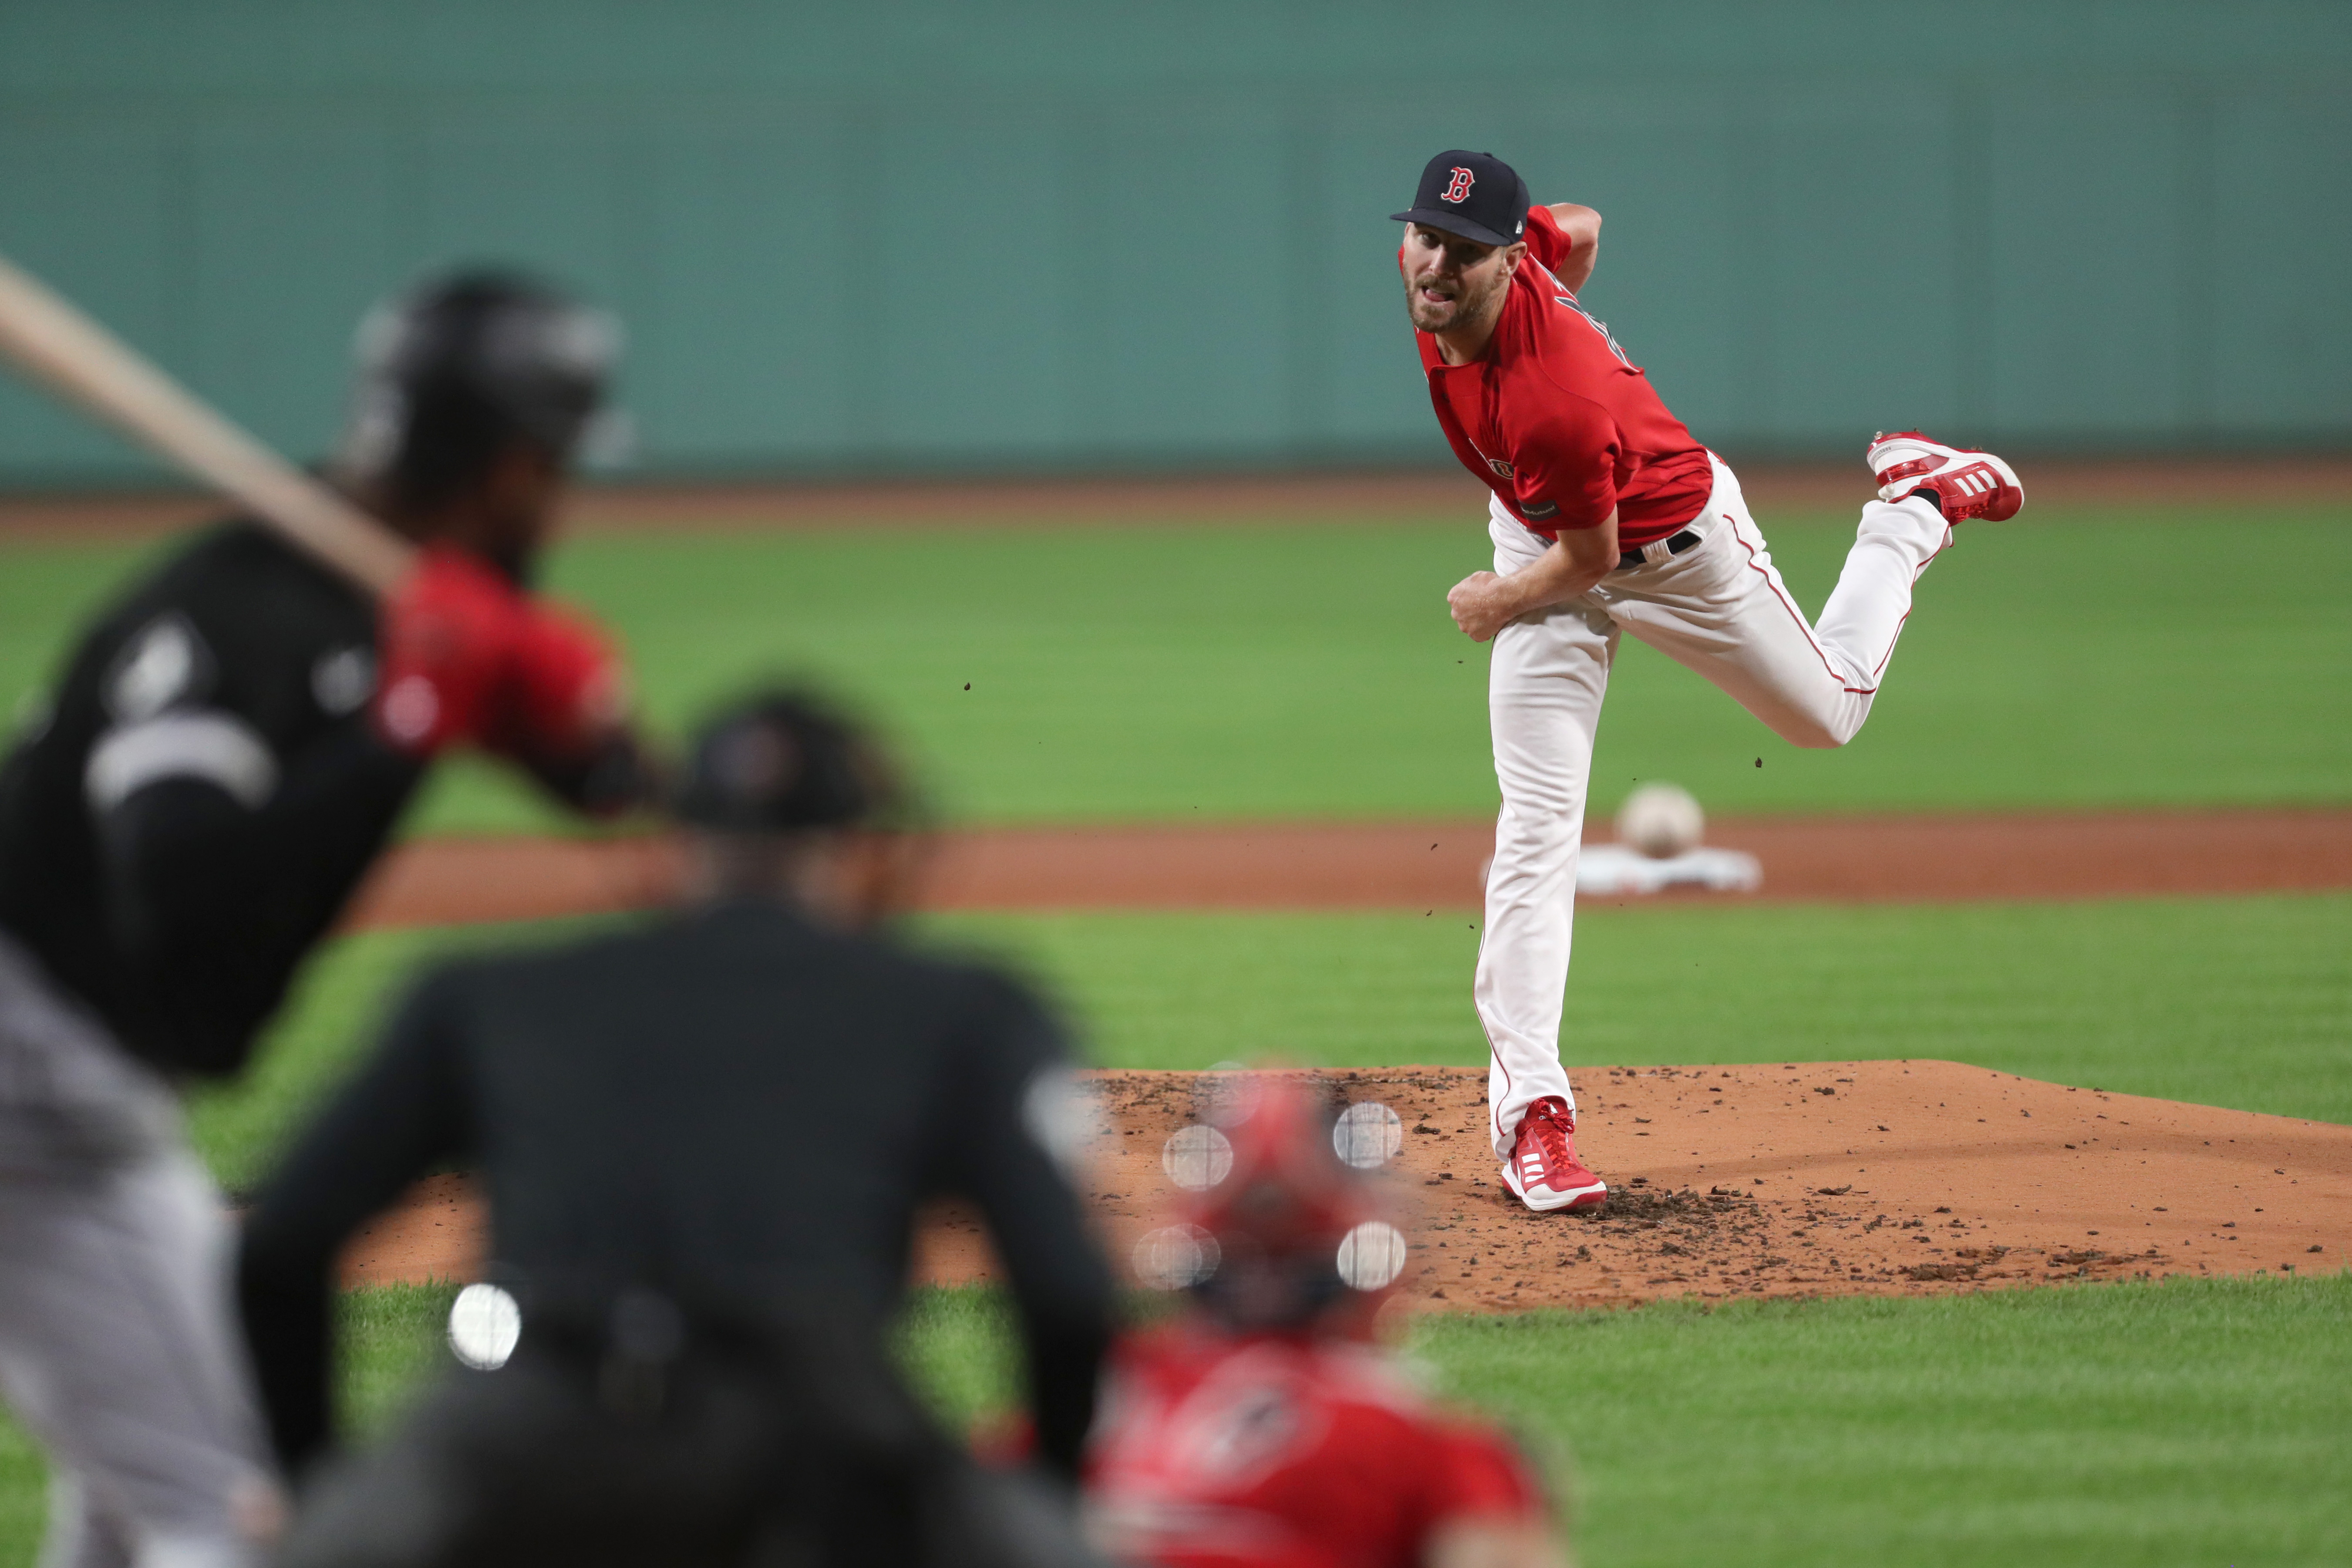 Red Sox on X: Chris Martin has allowed 1 run in his last 23